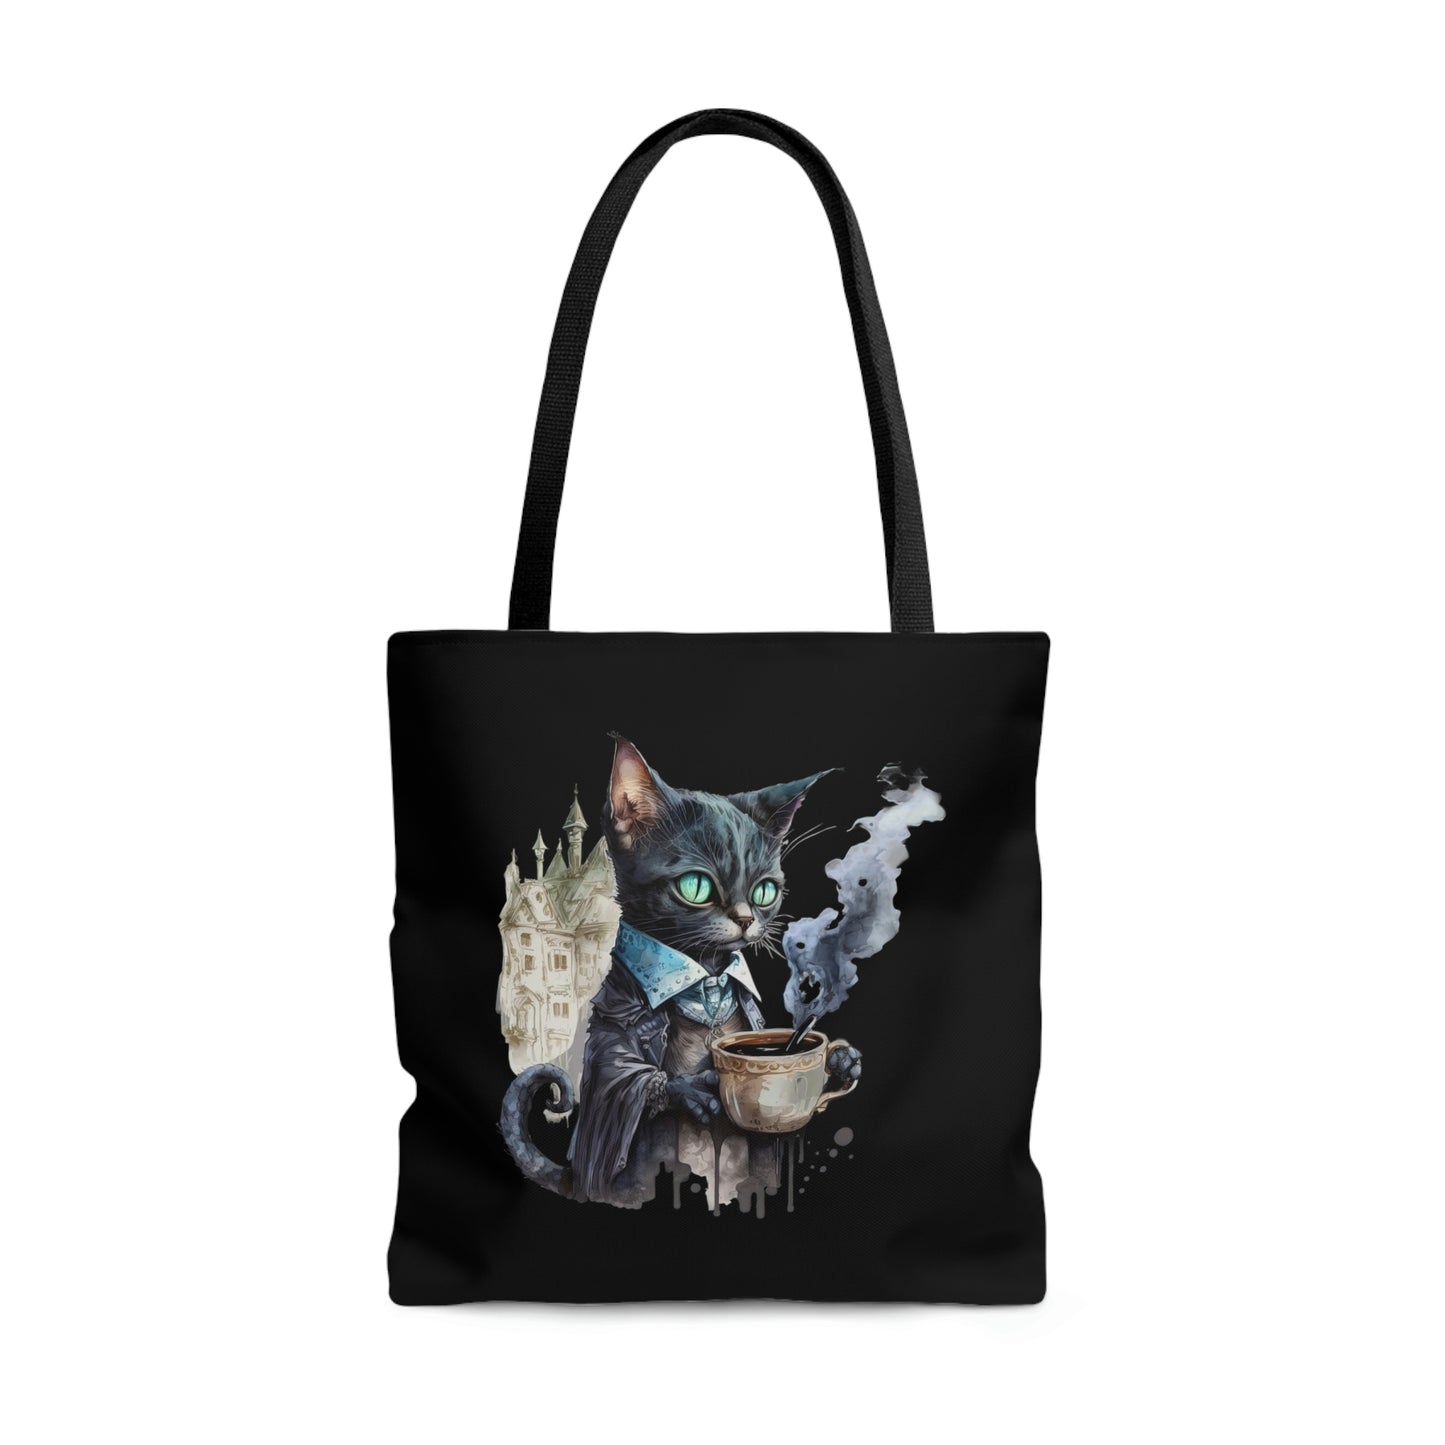 Goth Cat & Coffee Lovers Large Eco Tote Bag for Book Lovers, Dual Printed, Book Reader Gift Ideas - black Large Eco Tote Bag